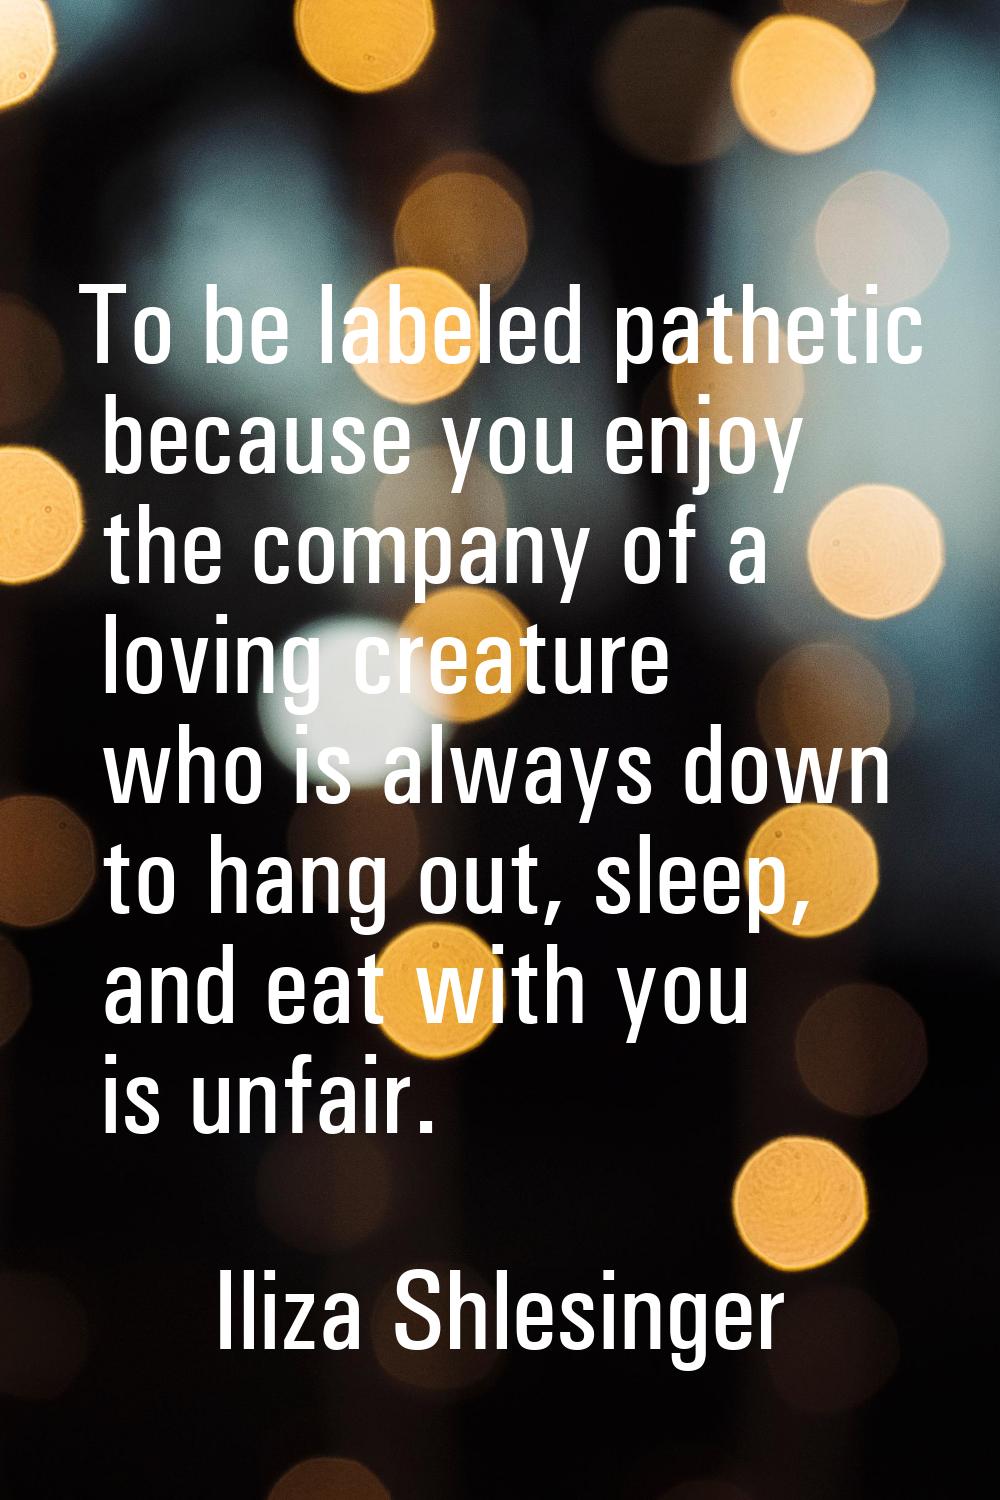 To be labeled pathetic because you enjoy the company of a loving creature who is always down to han